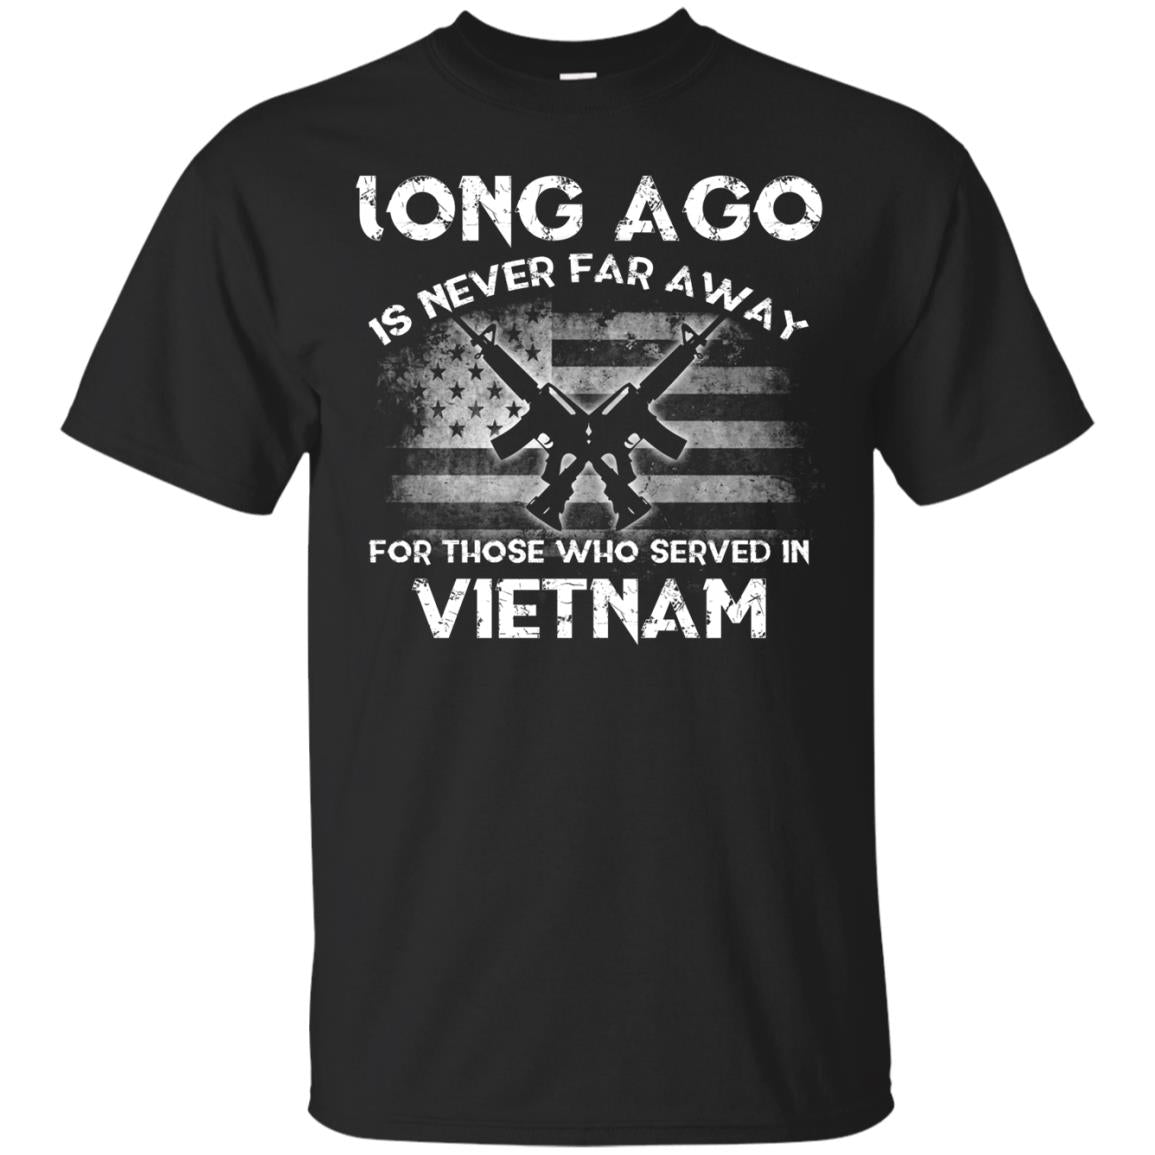 Long Ago Is Never Far Away For Those Who Served In VietnamG200 Gildan Ultra Cotton T-Shirt